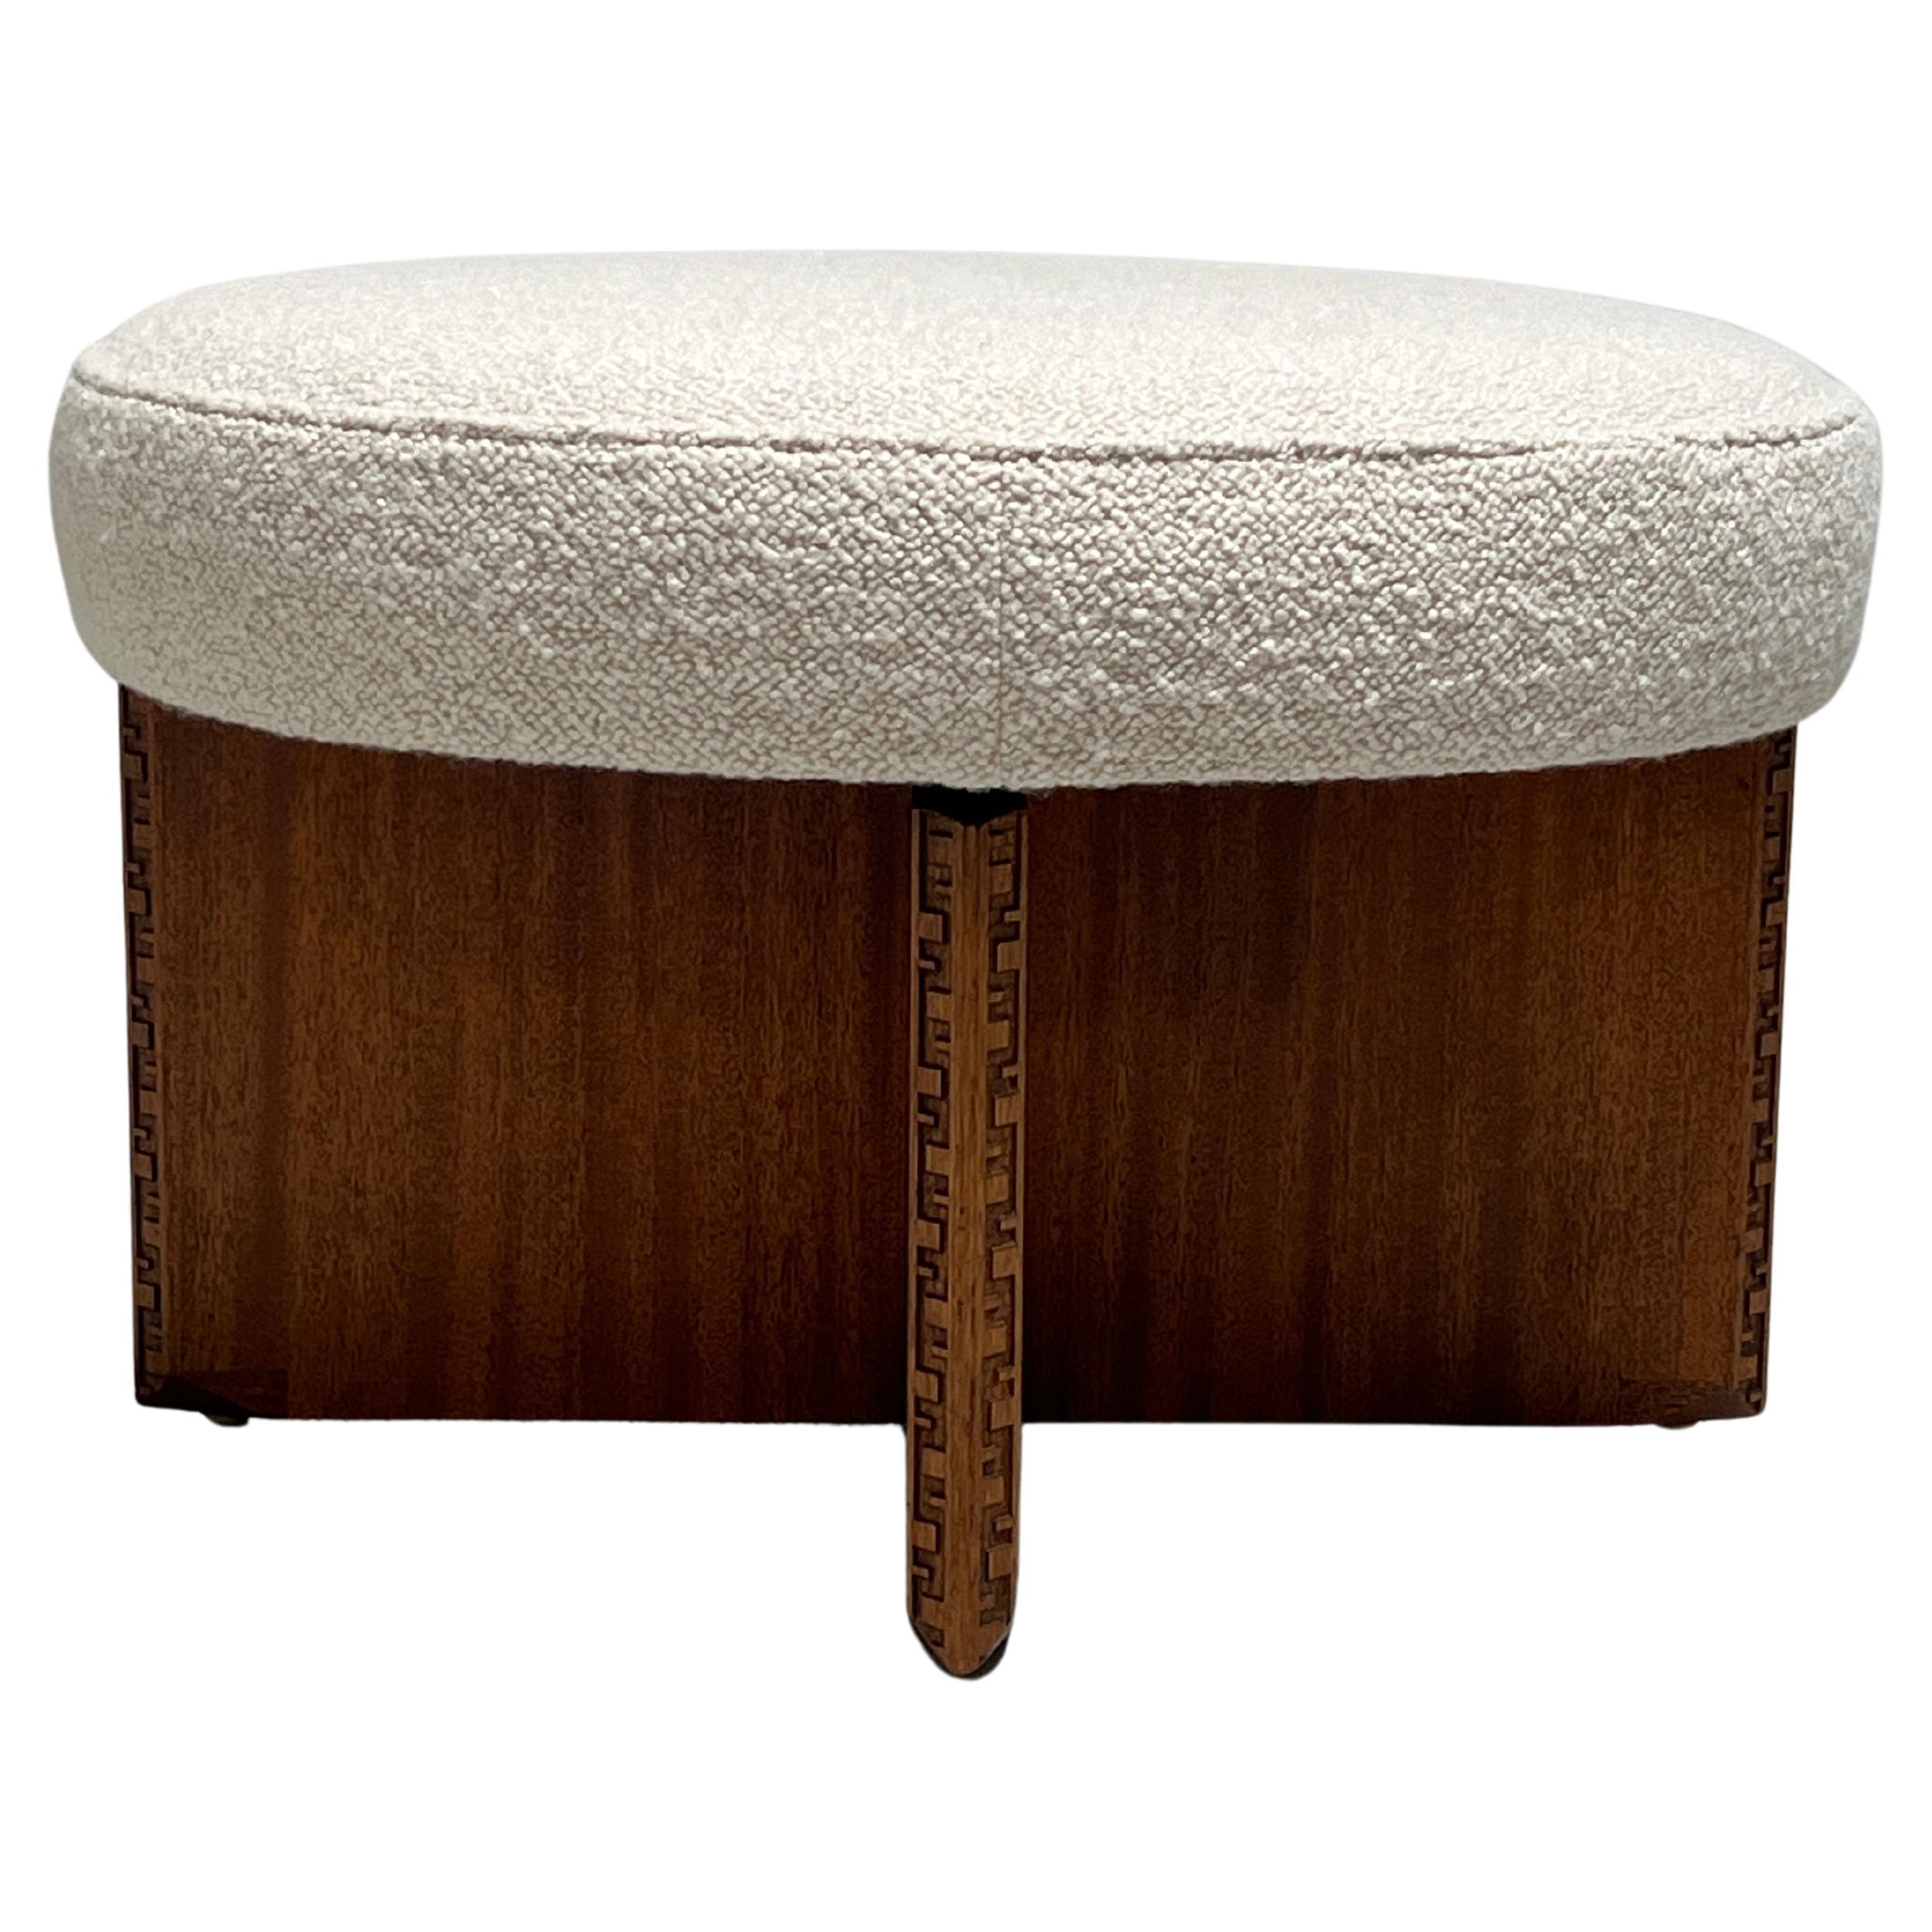 A mahogany rotating ottoman with upholstered top. Designed by Frank Lloyd Wright for Henredon. 
Reupholstered in Holly Hunt fabric.